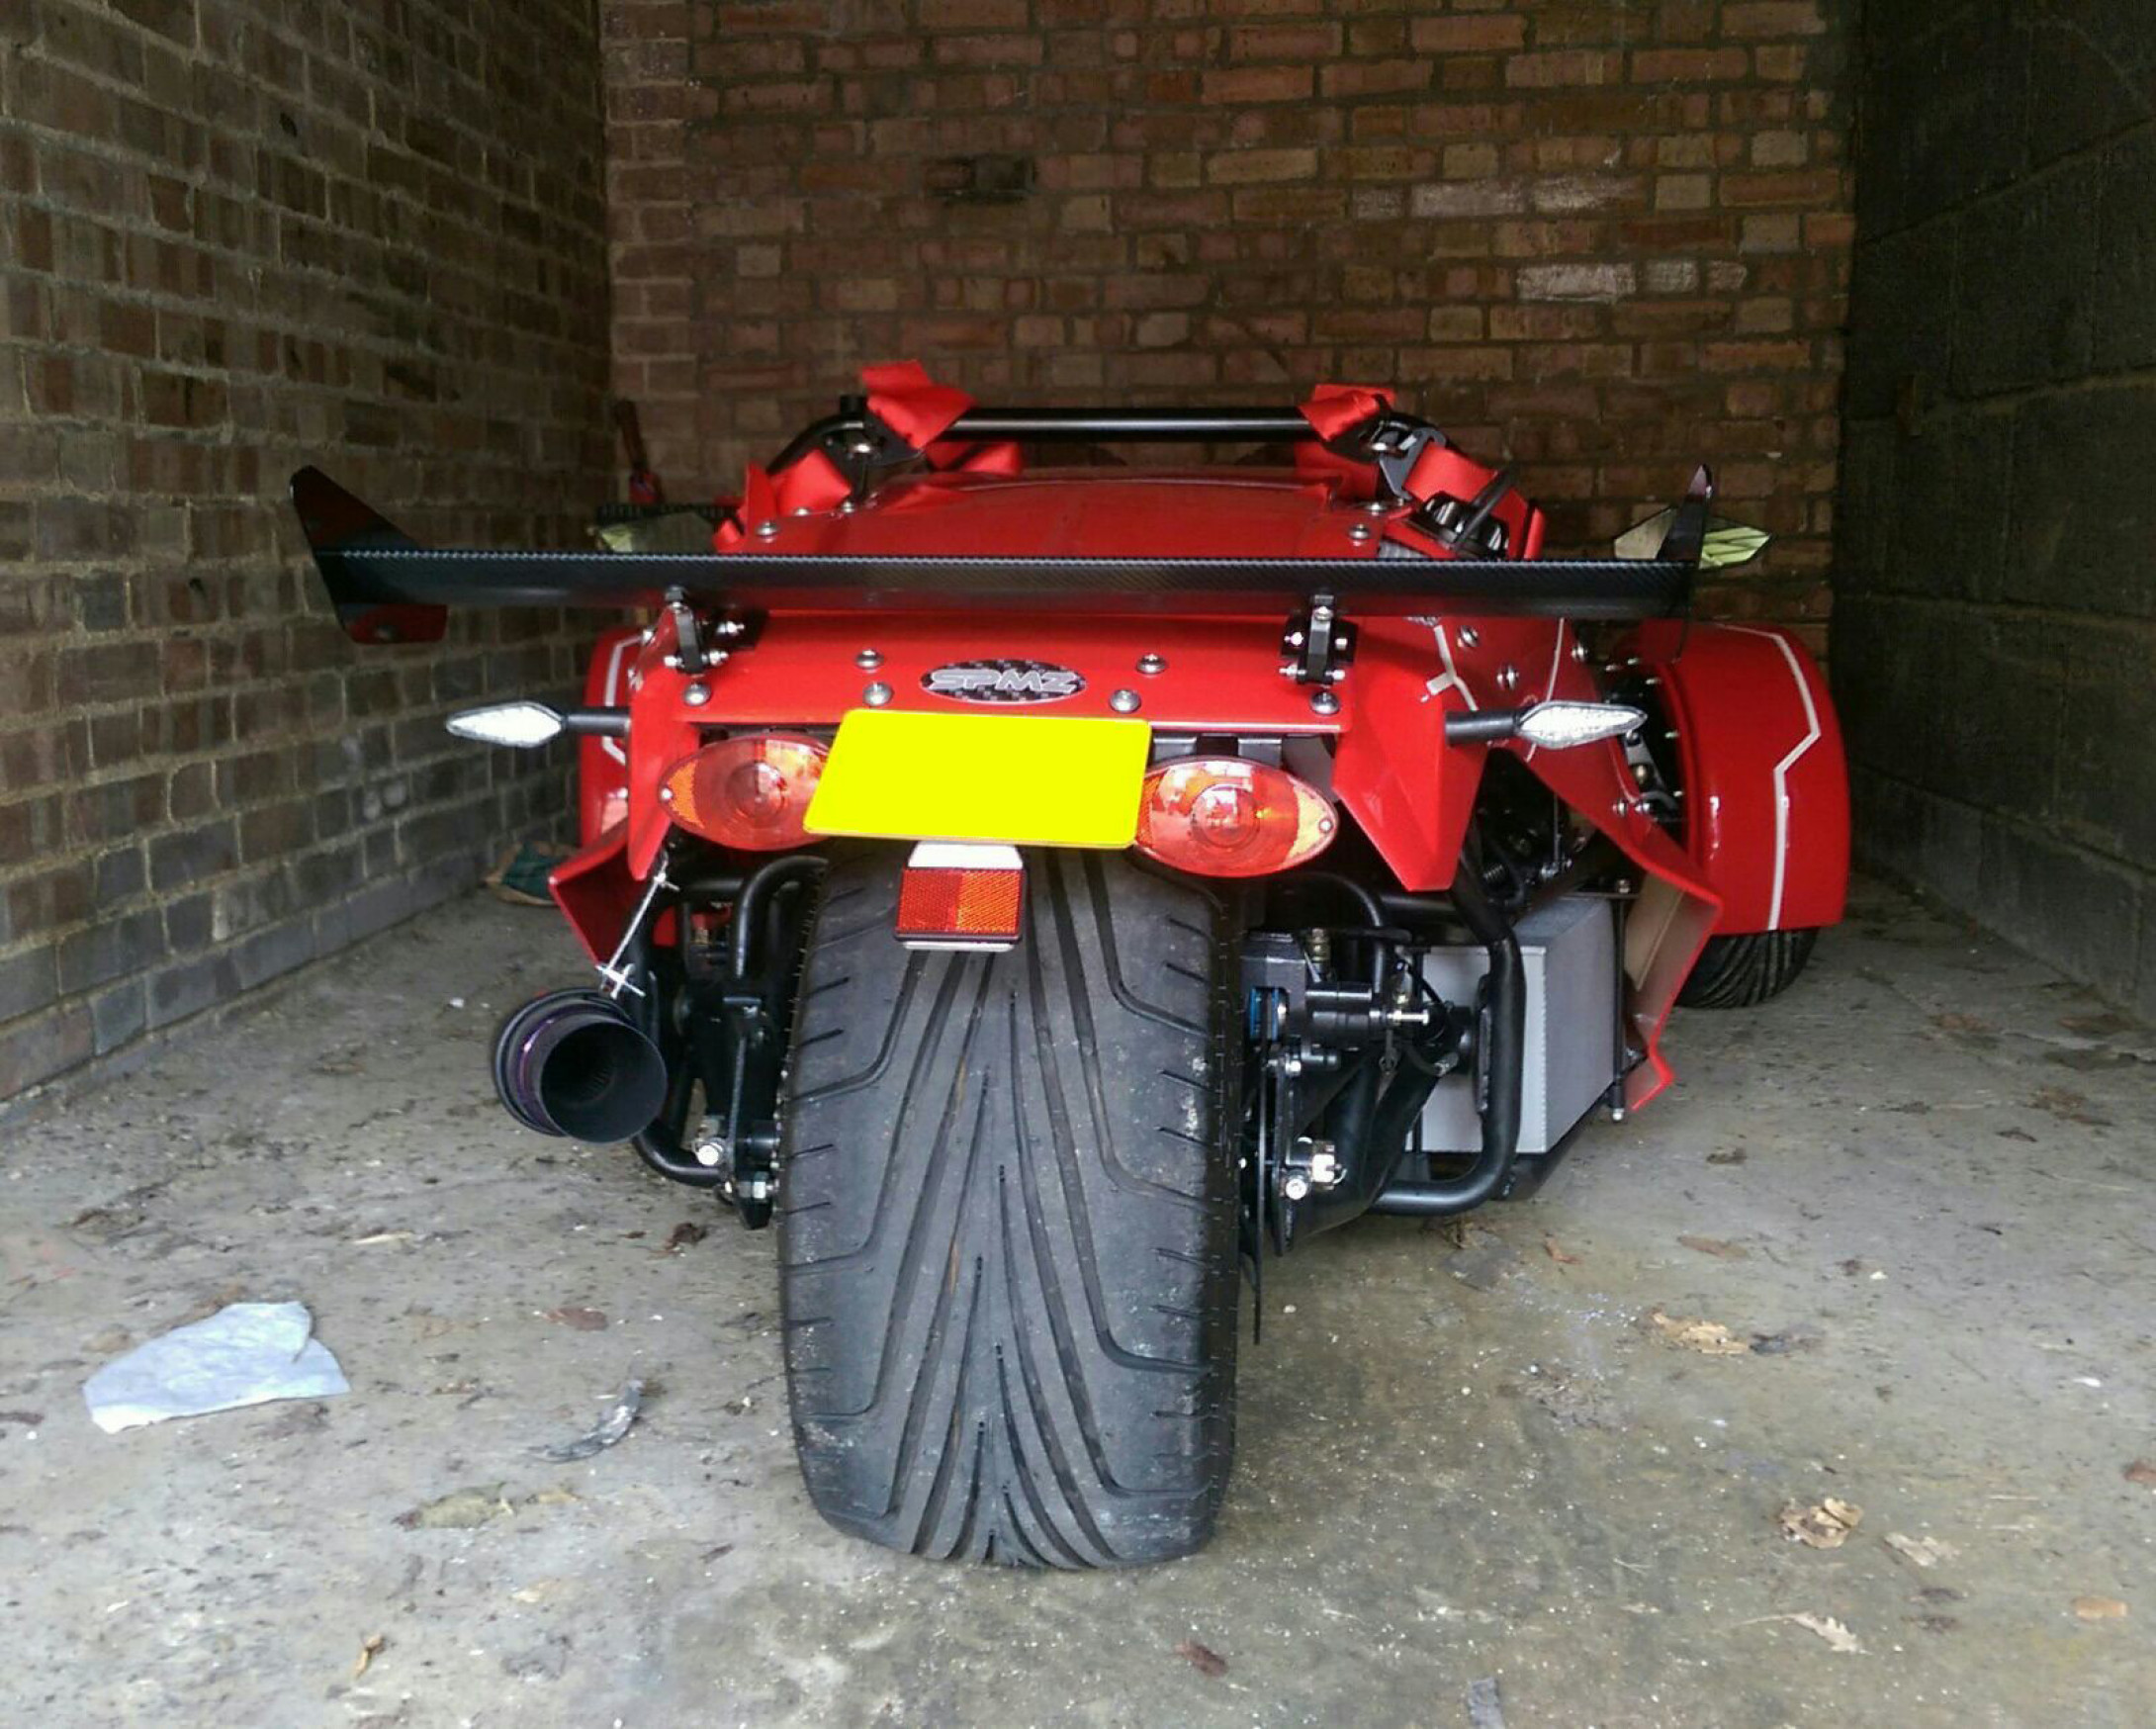 Big red wheels | LBT Motorcycle Recovery | London